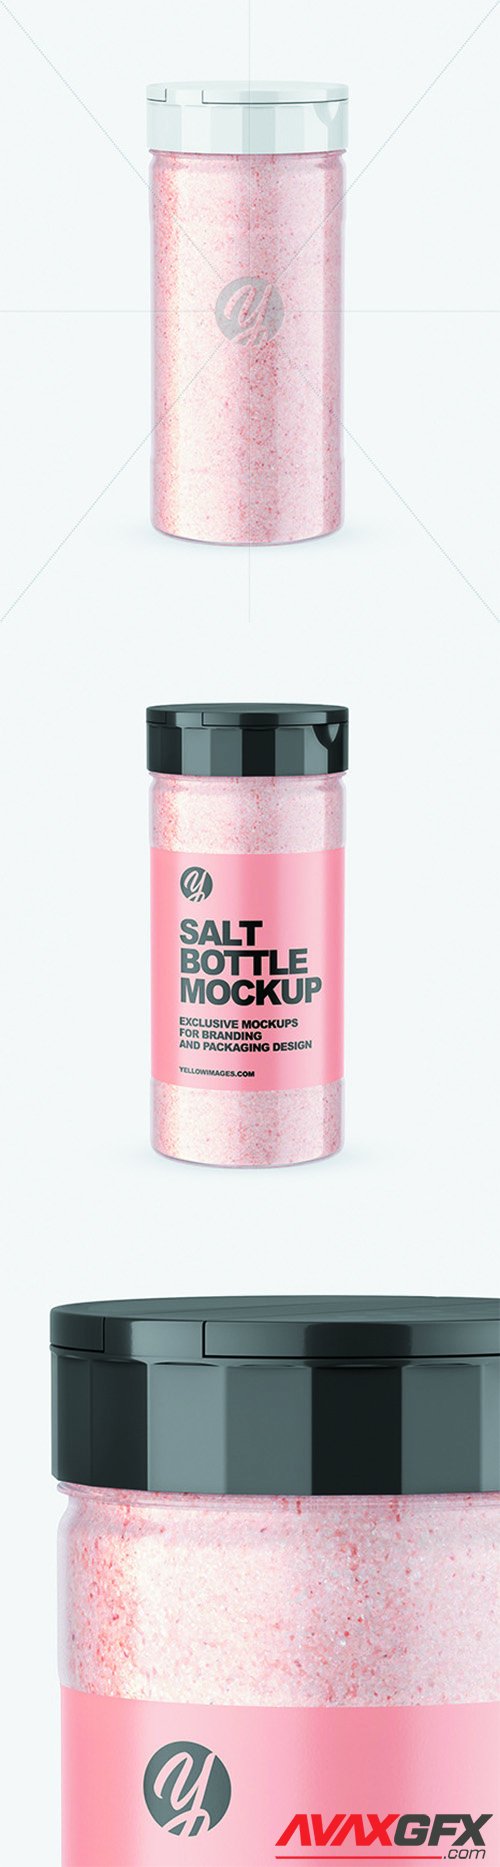 Download Glossy Clear Jar with Pink Salt Mockup 68701 » AVAXGFX - All Downloads that You Need in One ...